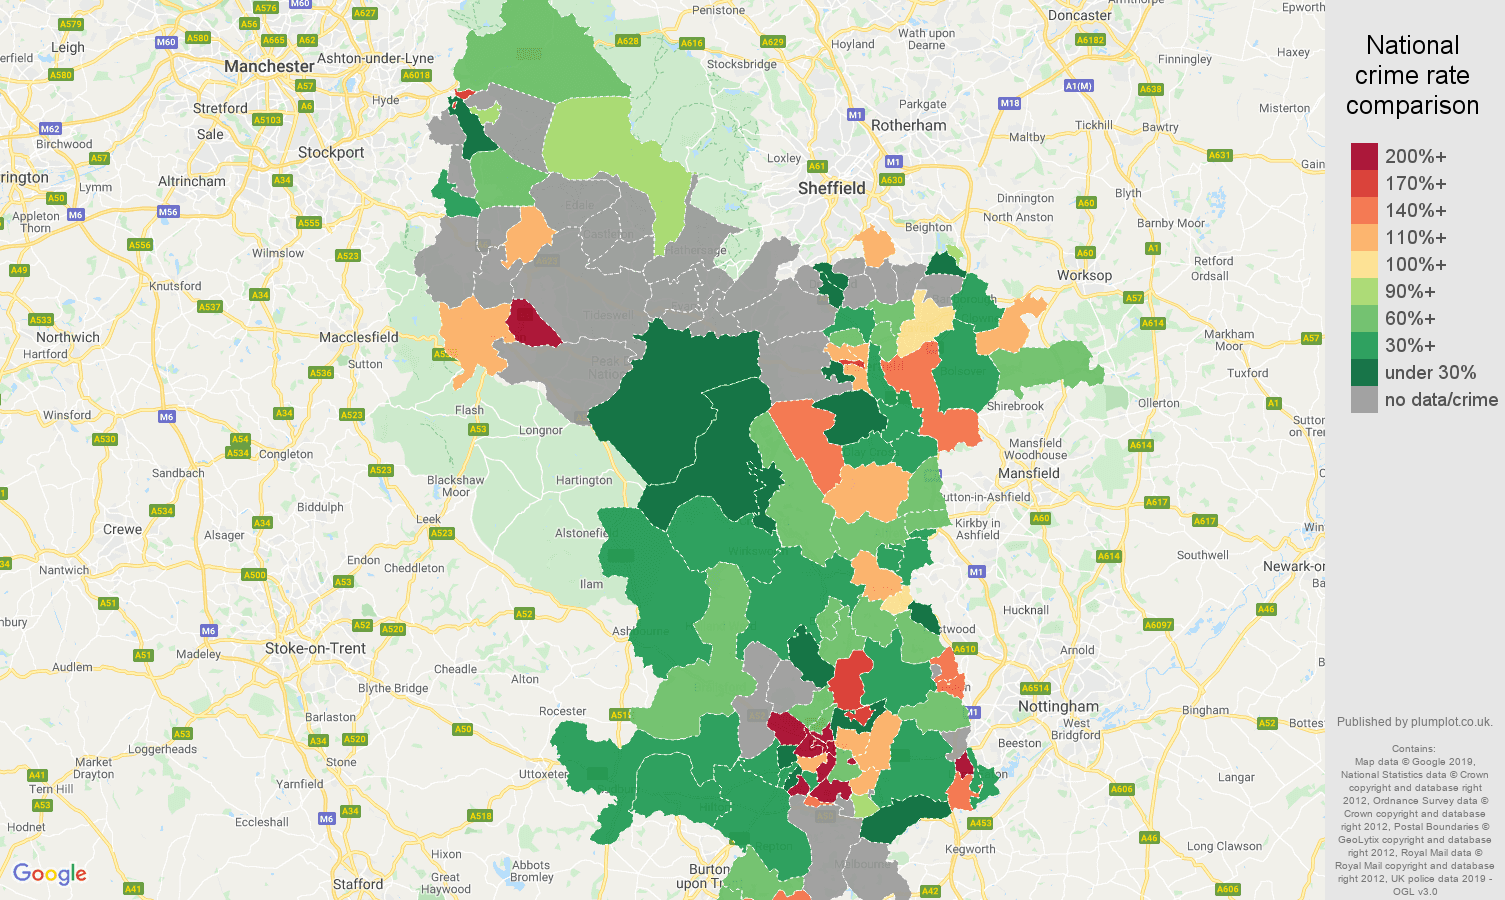 Derbyshire possession of weapons crime rate comparison map